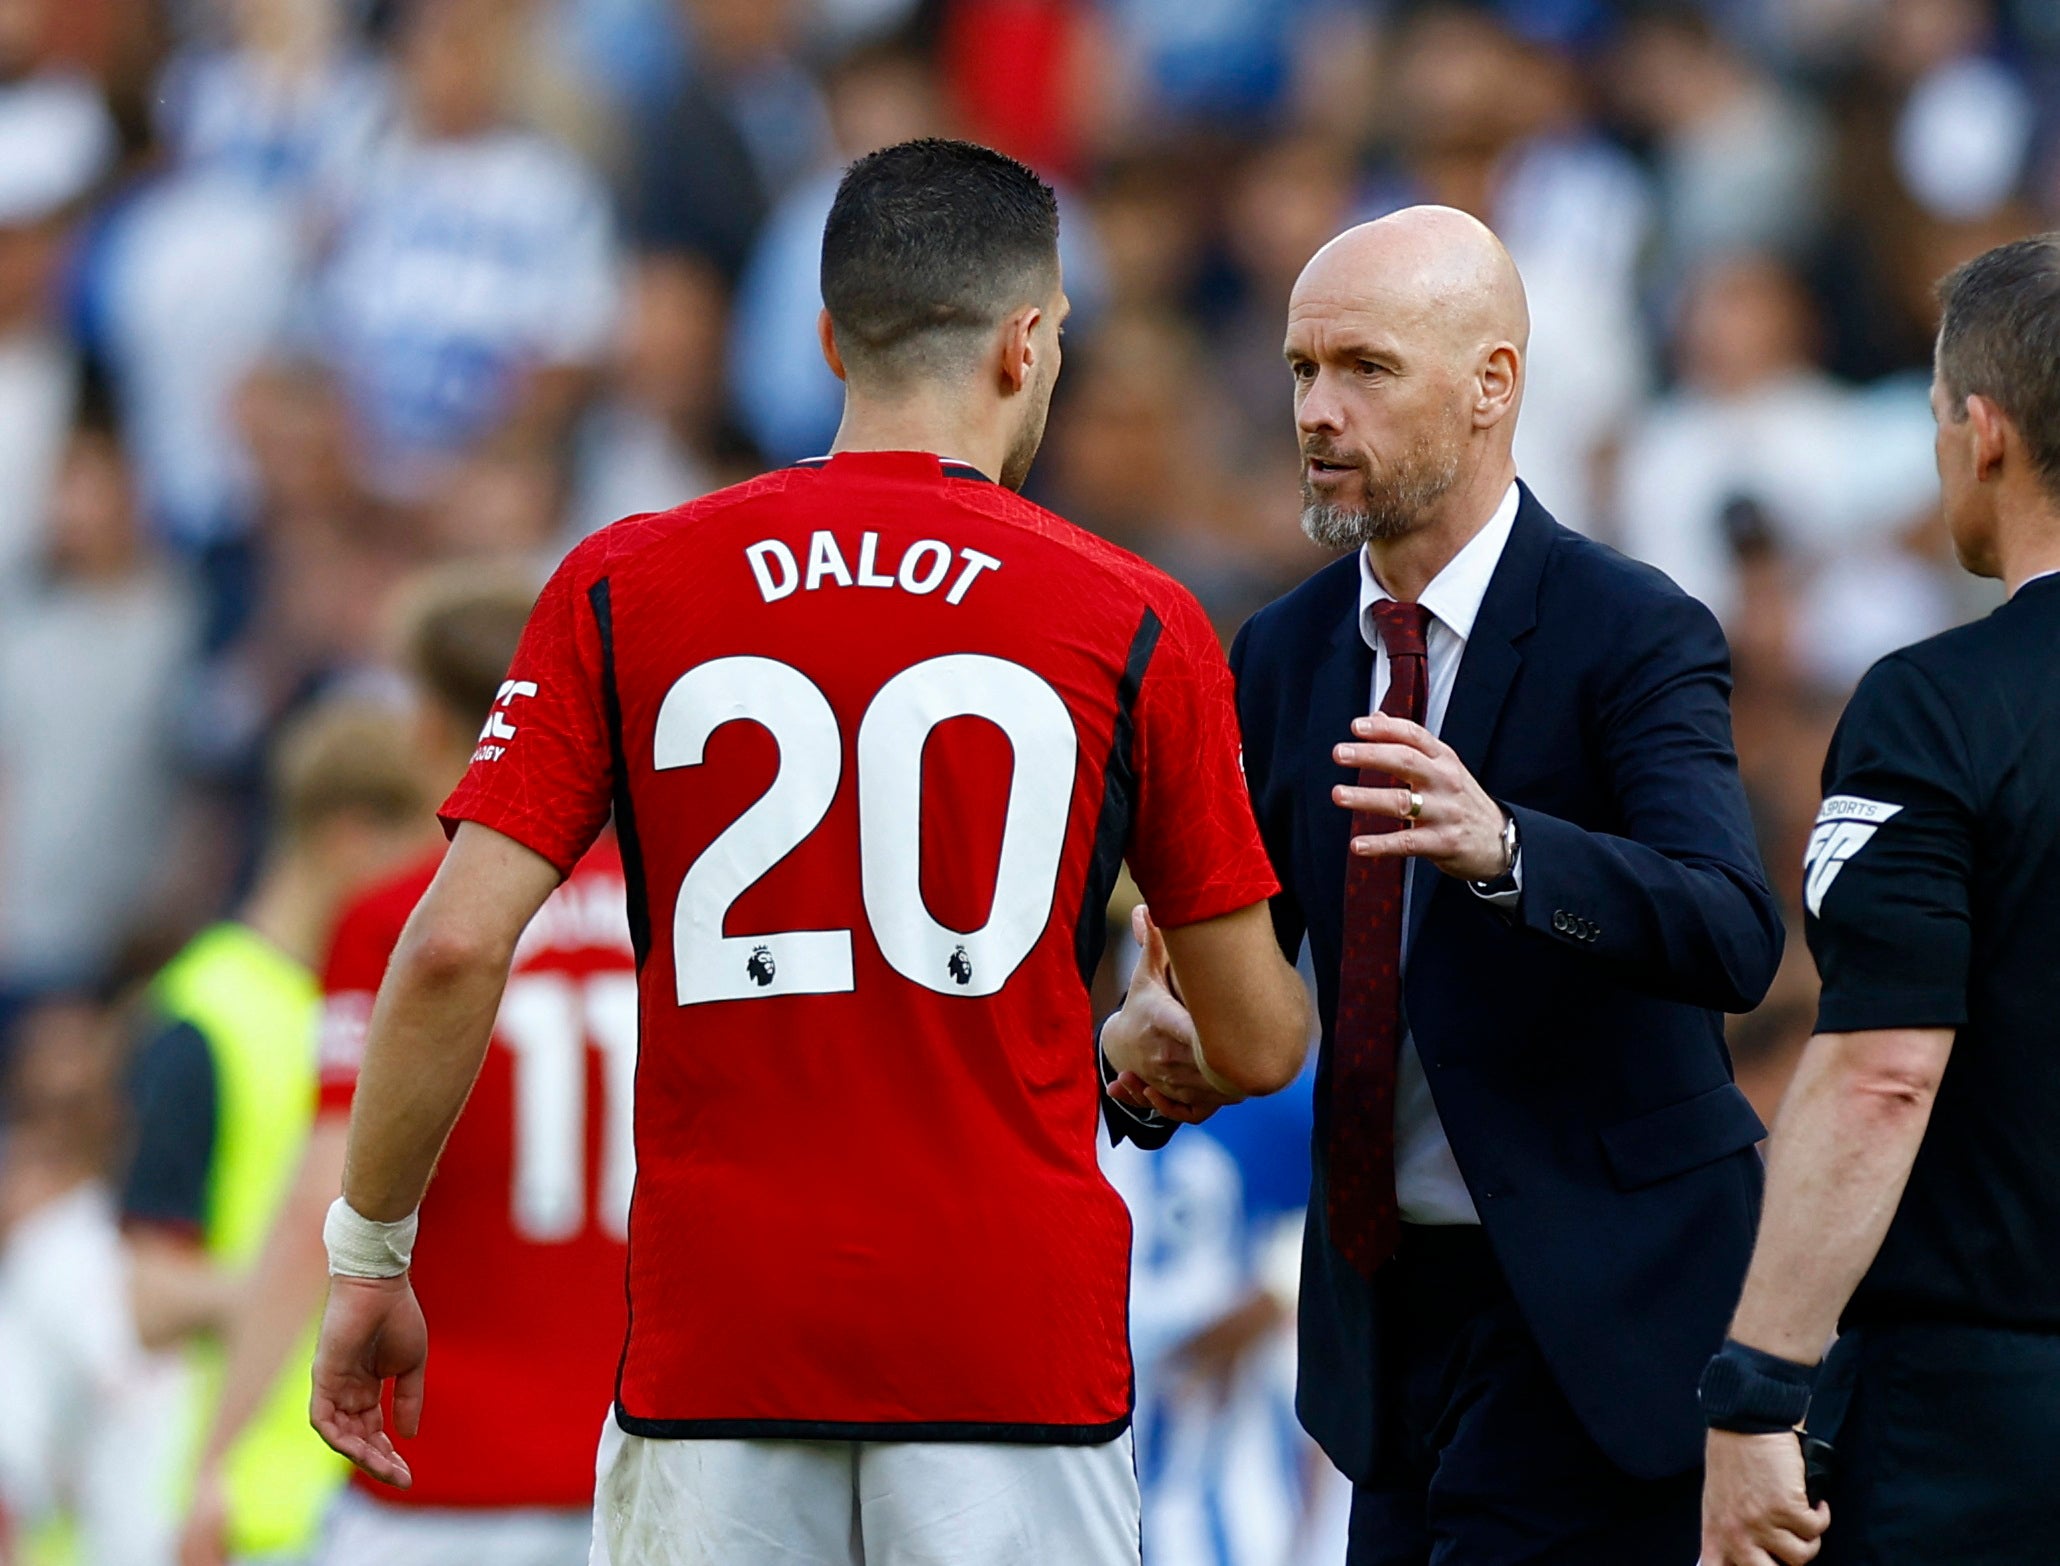 diogo dalot, erik ten hag, fa cup, how diogo dalot became manchester united’s unlikely but welcome exception